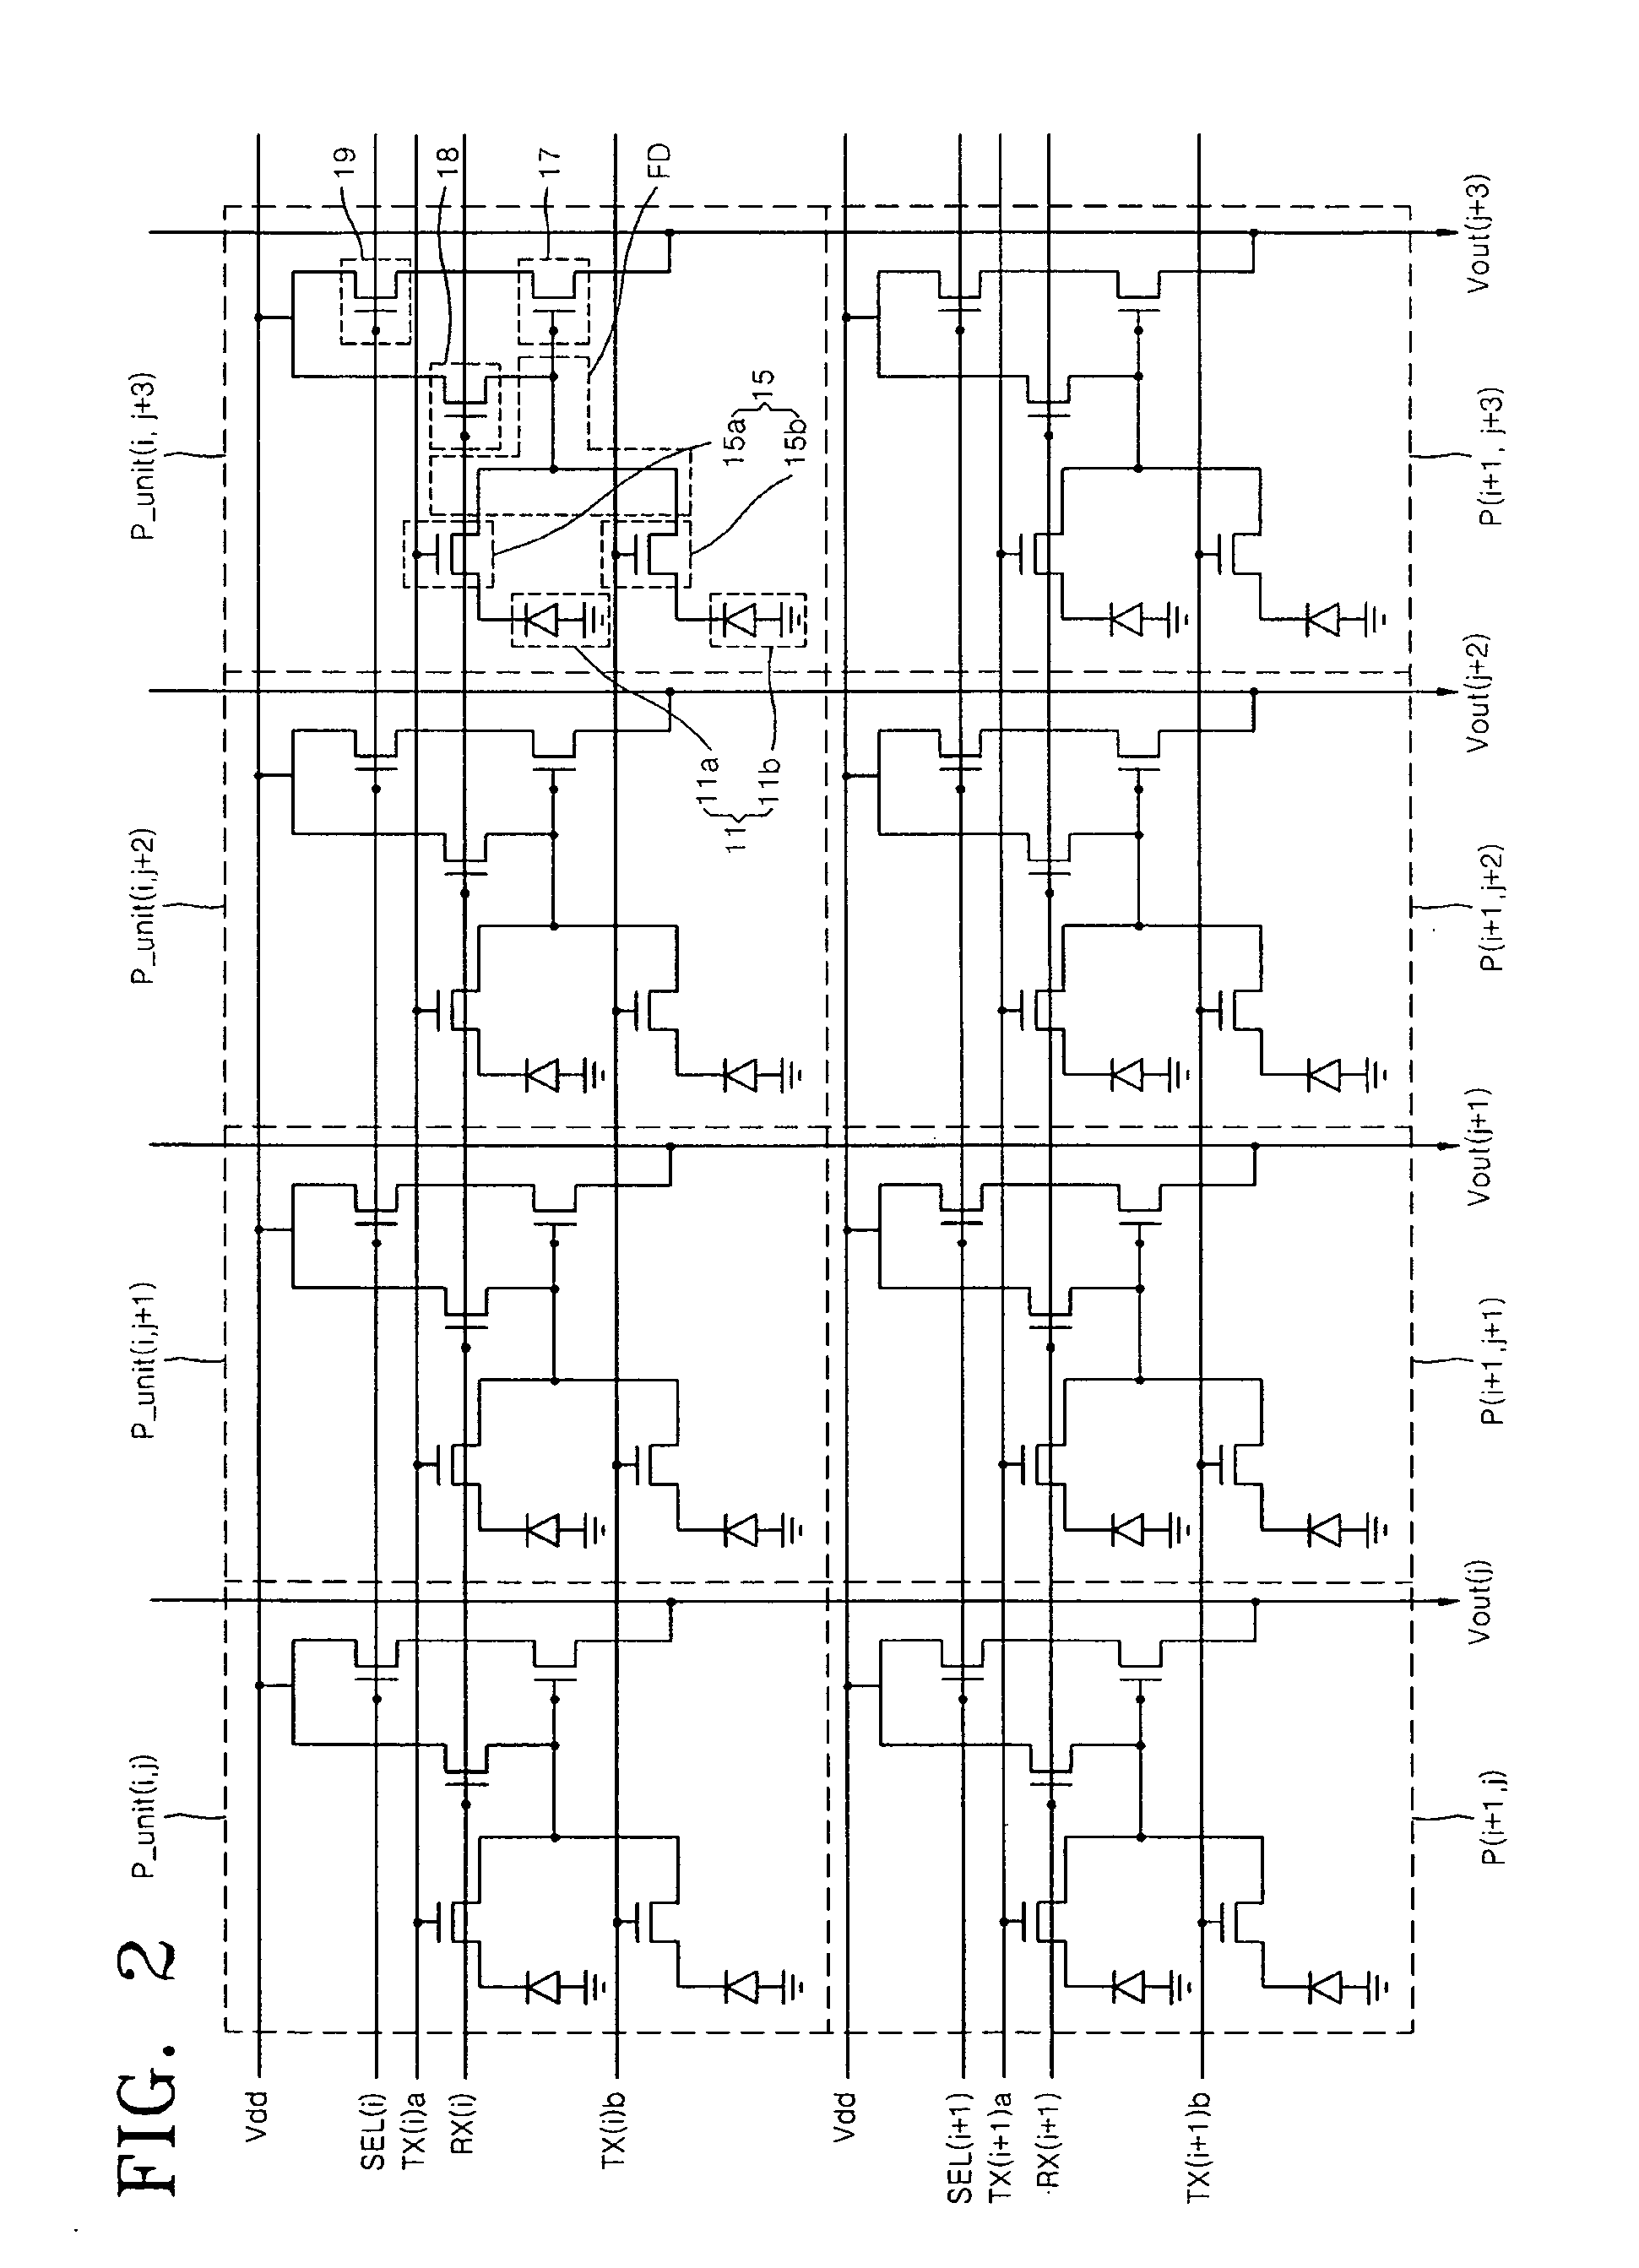 Image sensor with high fill factor pixels and method for forming an image sensor